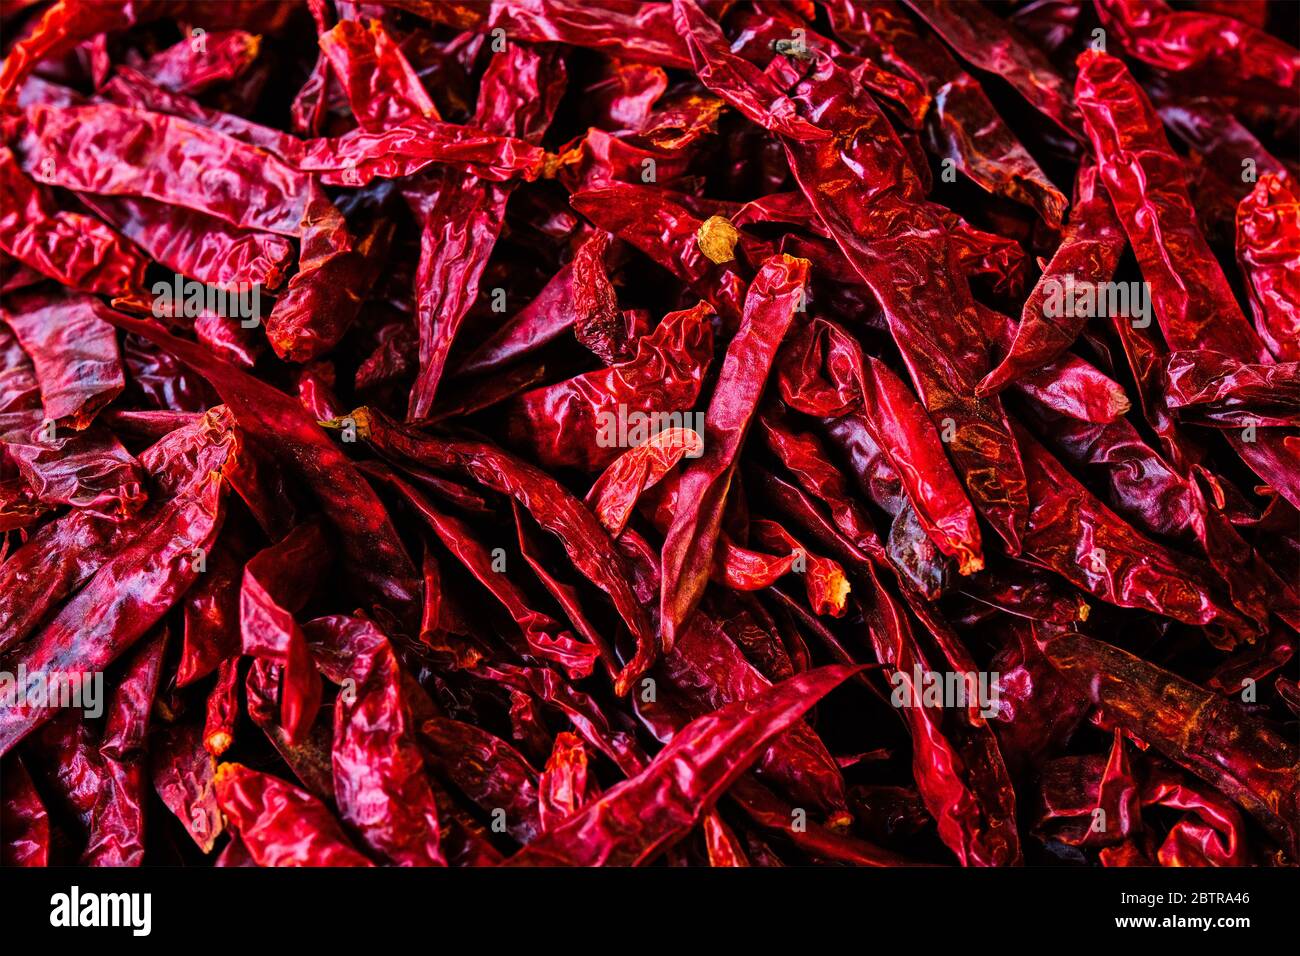 Red spicy chili peppers Stock Photo